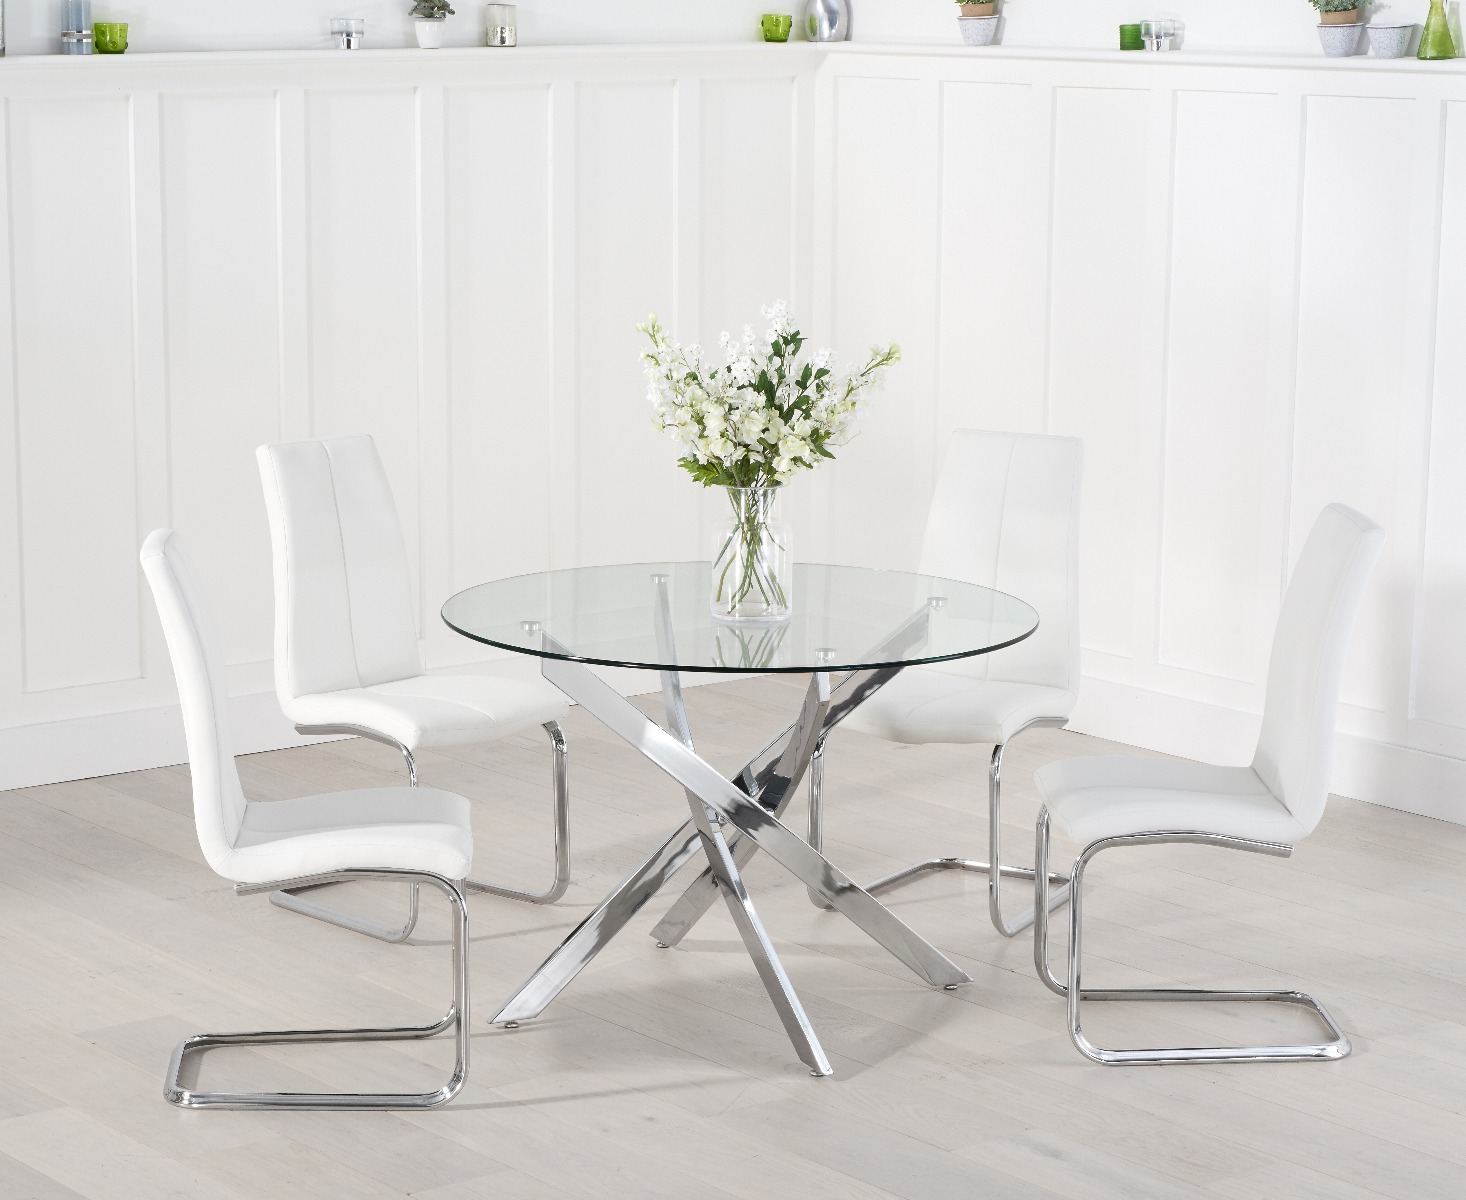 Denver 110cm Glass Dining Table With 4 Grey Tarin Chairs